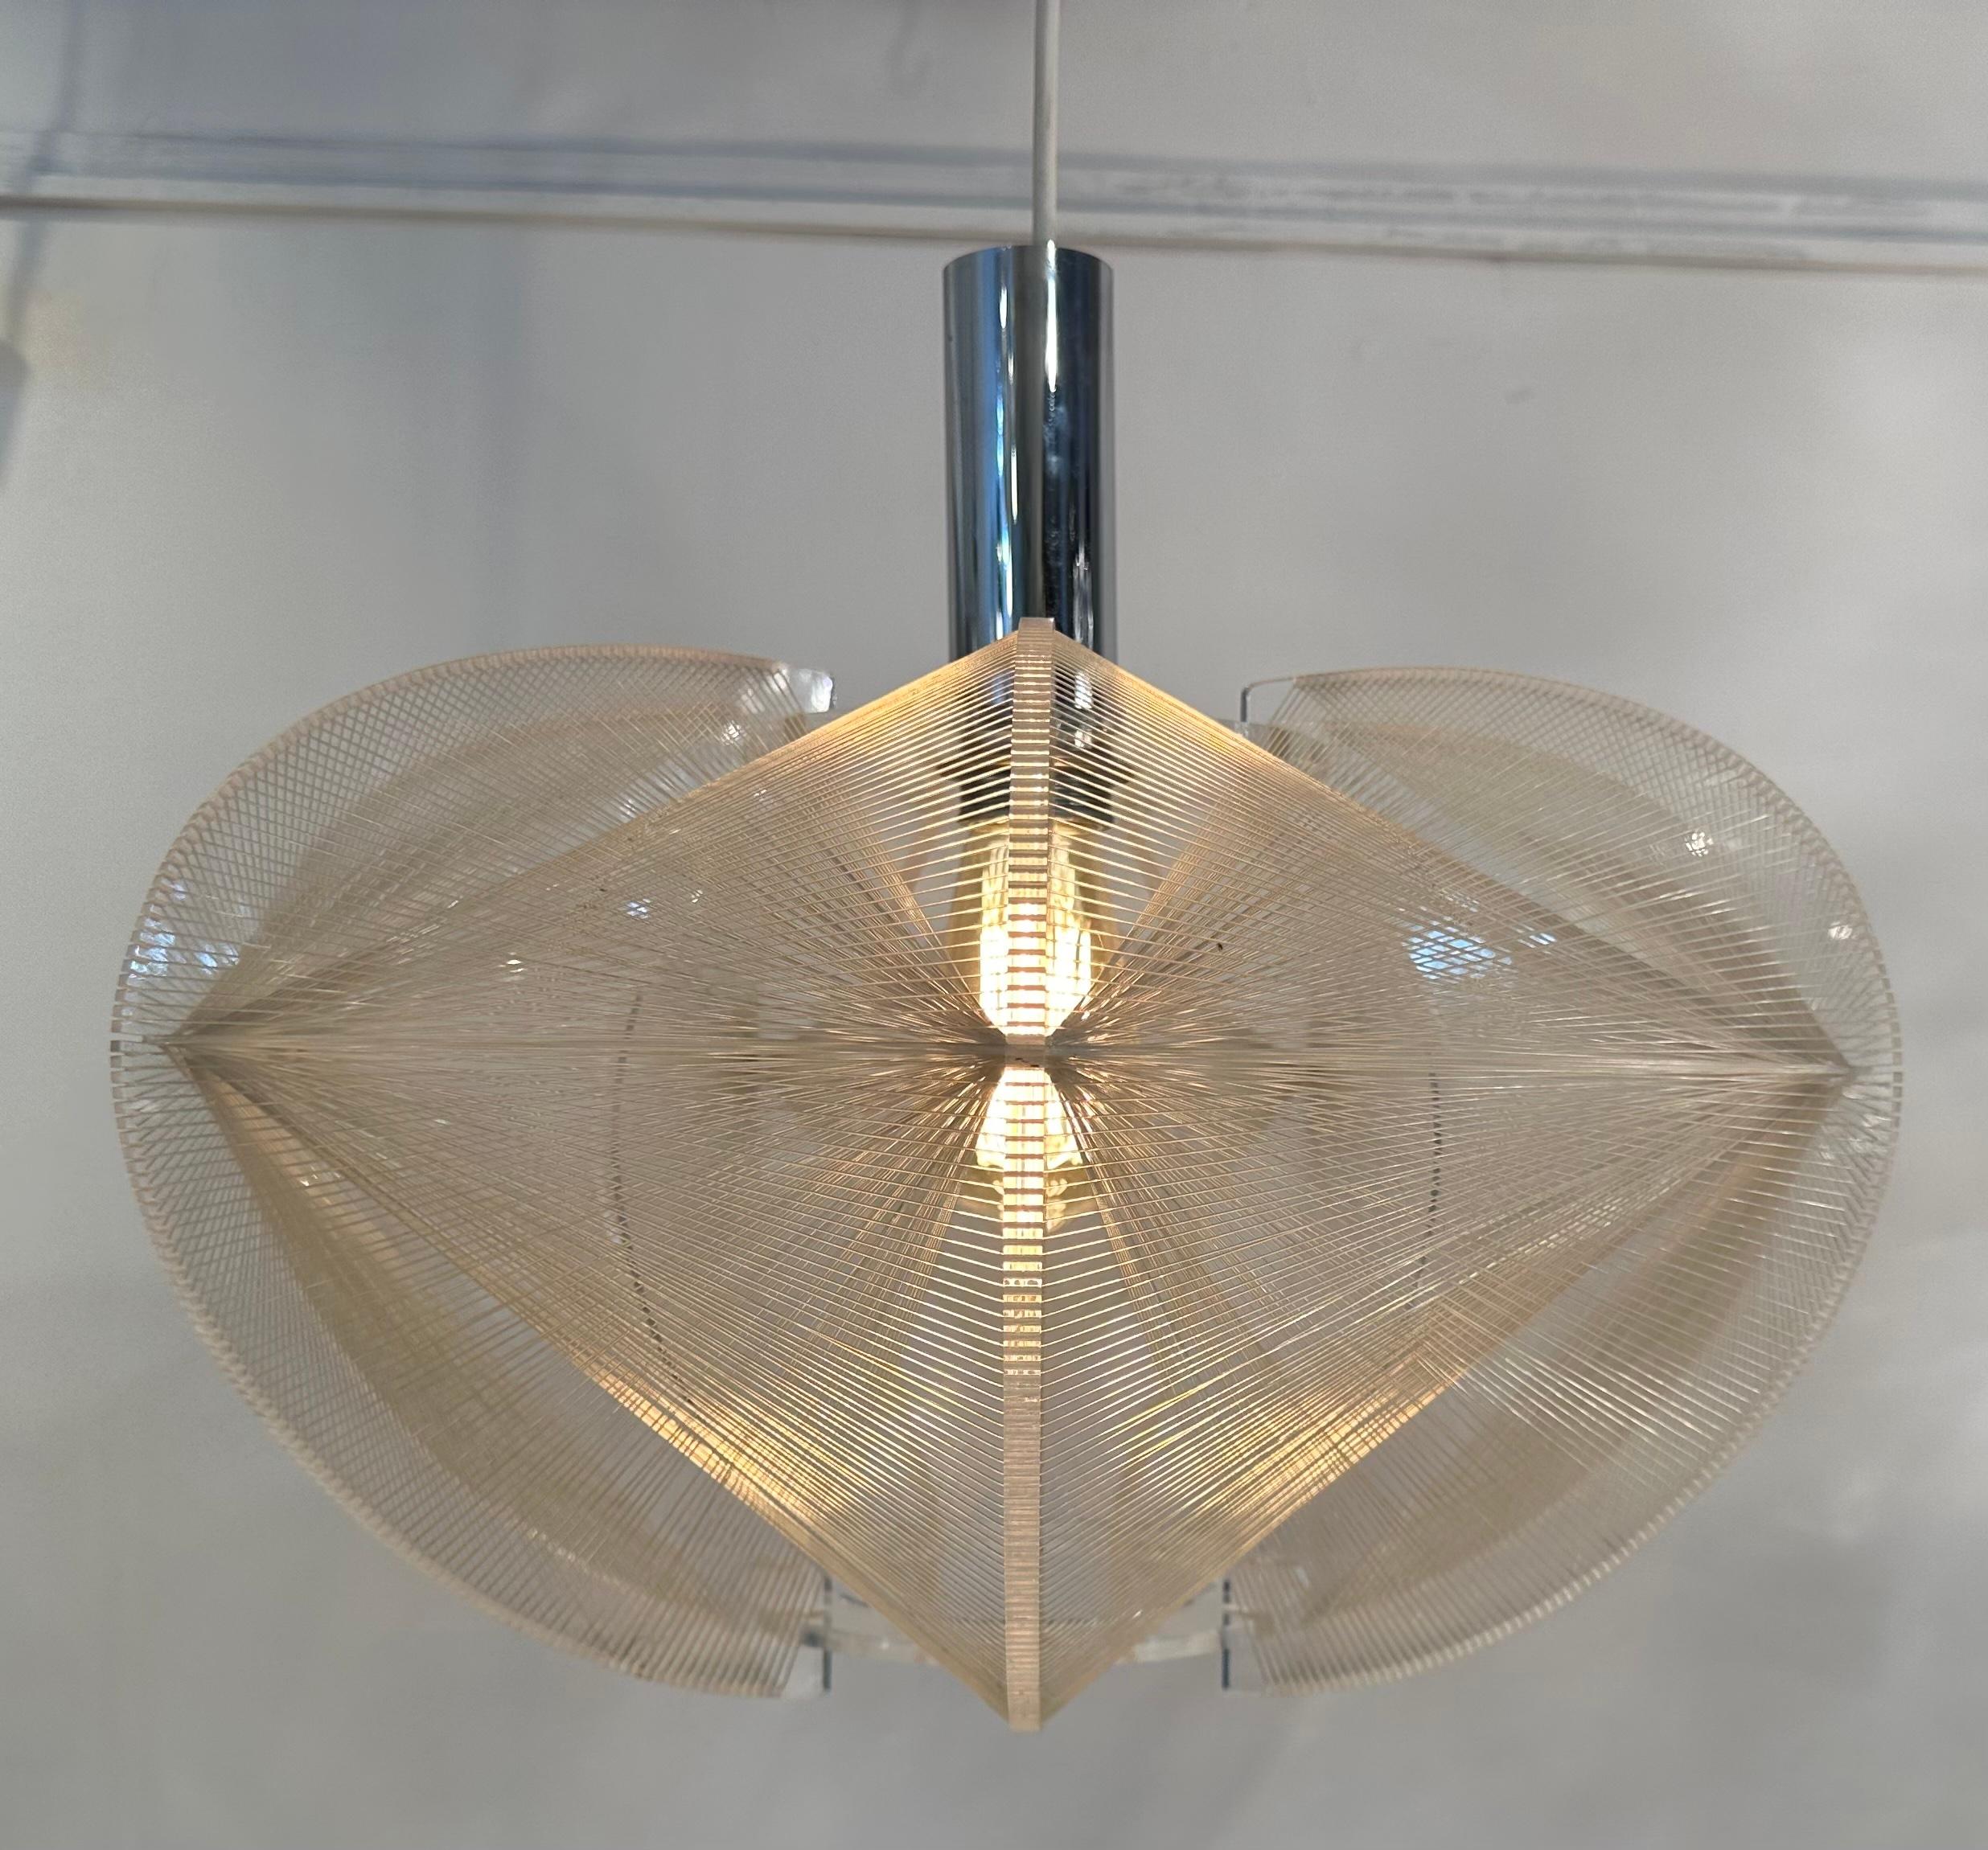 1970s German space age nylon, perspex and chrome 'fishing line' pendant, hanging, ceiling light. Manufactured by Sompex and designed by French designer Paul Secon. The light is very cleverly constructed with a perspex frame with nylon threads strung